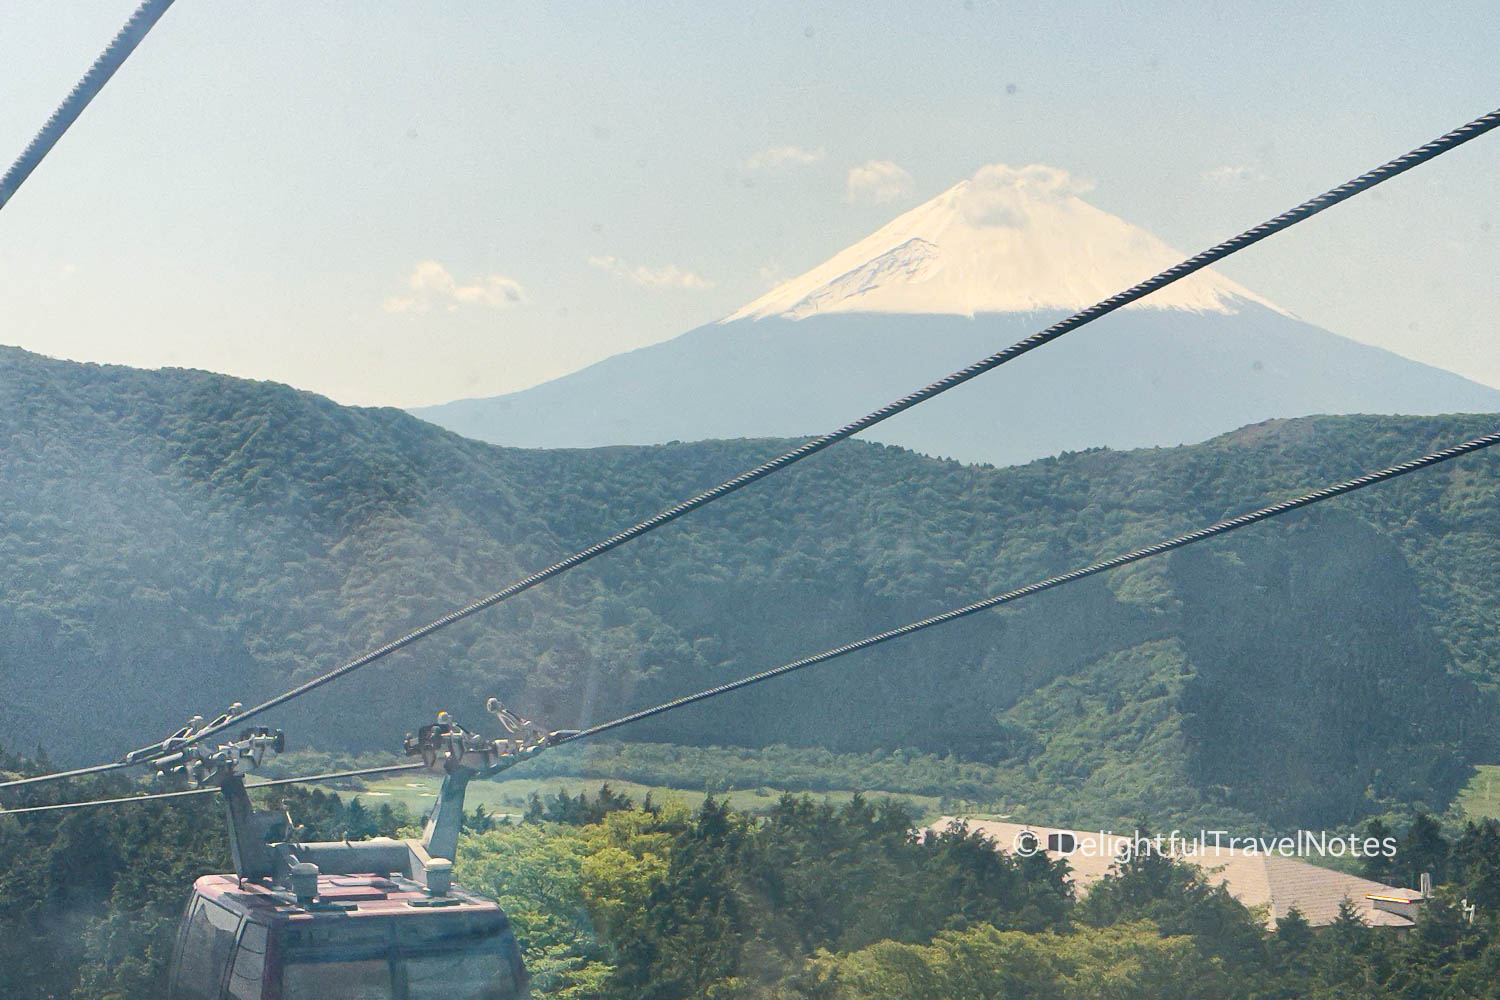 View of Mount Fuji from Hakone Ropeway cable car.